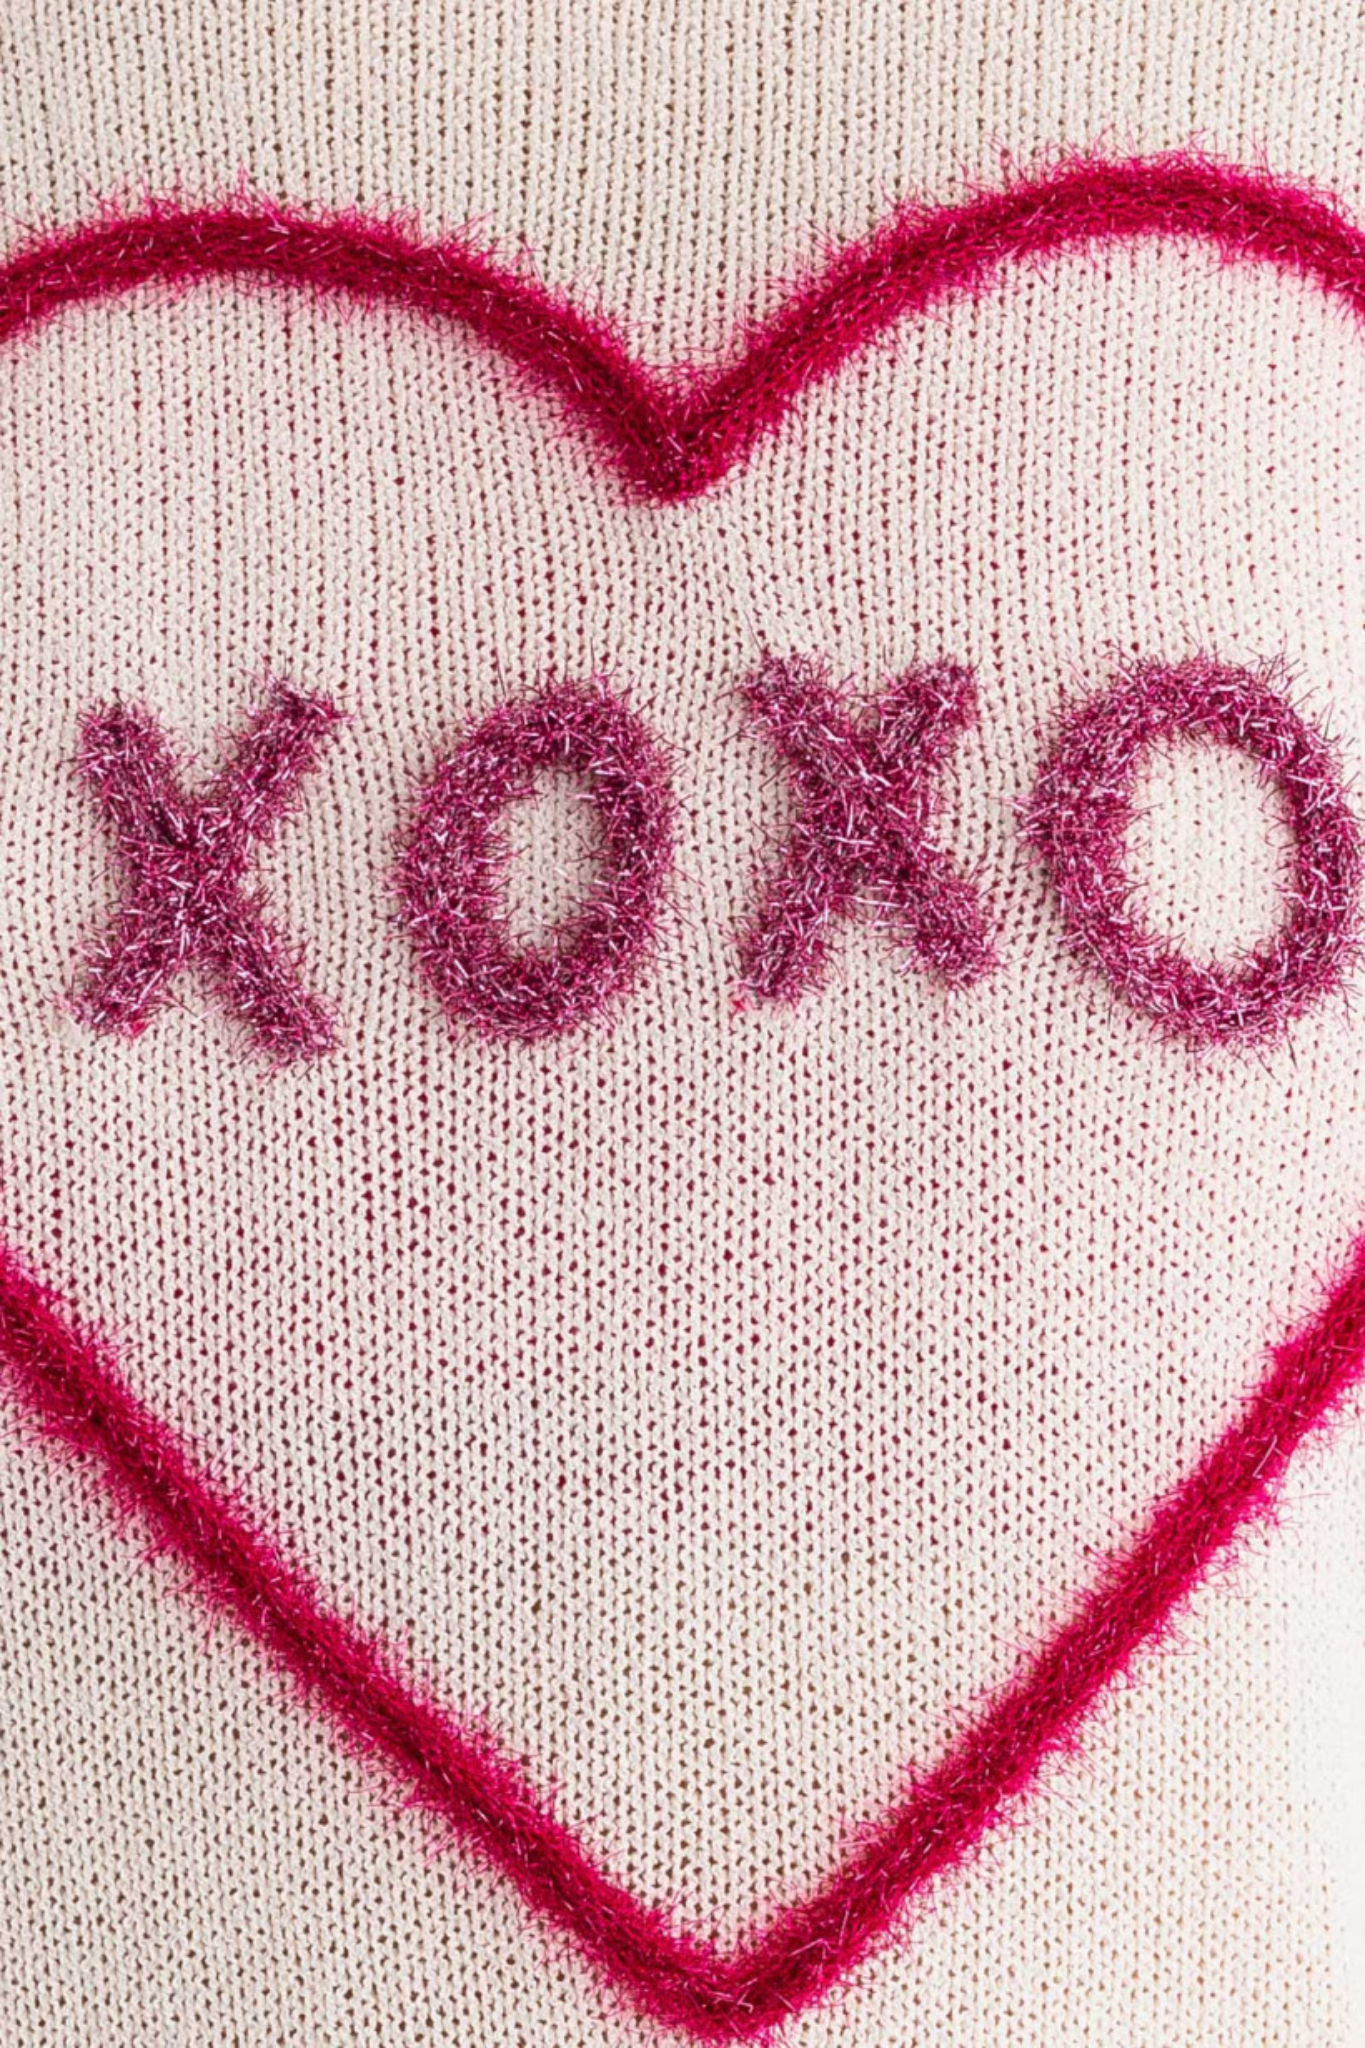 View 6 of XOXO Sweater Top, a Sweaters from Larrea Cove. Detail: .